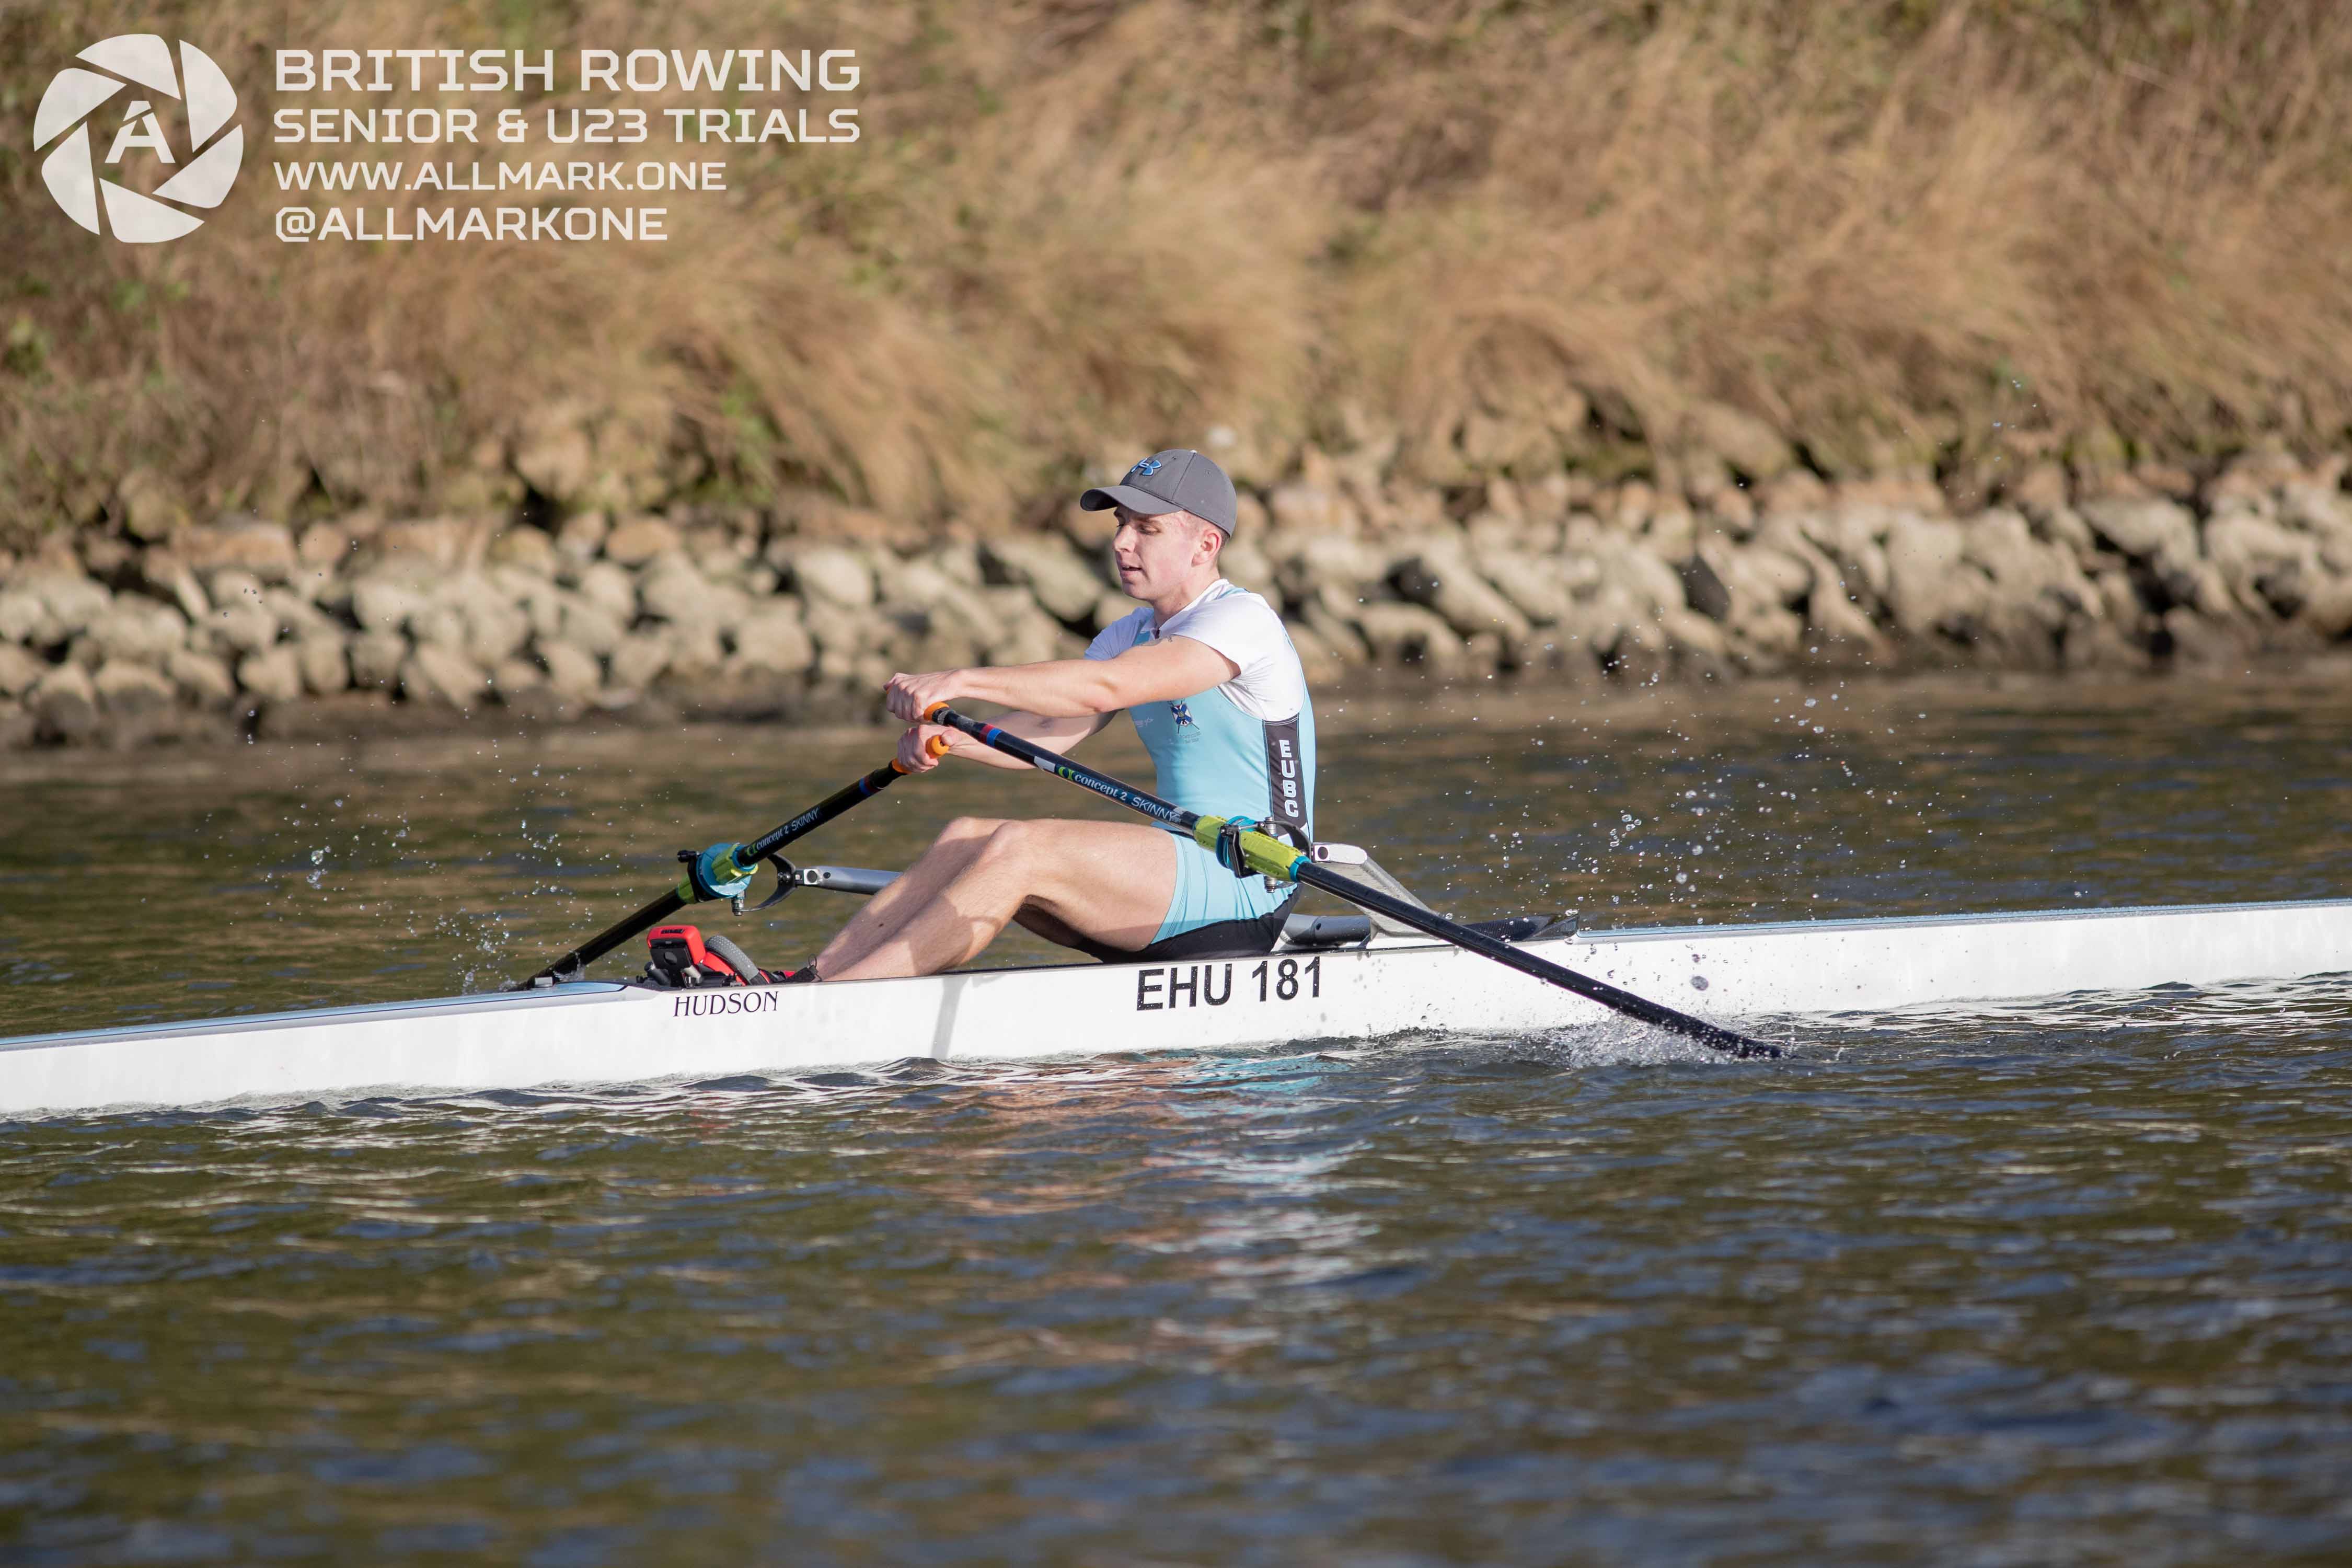 Dale Flockhart rowing in GB Trials - Photo credit All Mark One